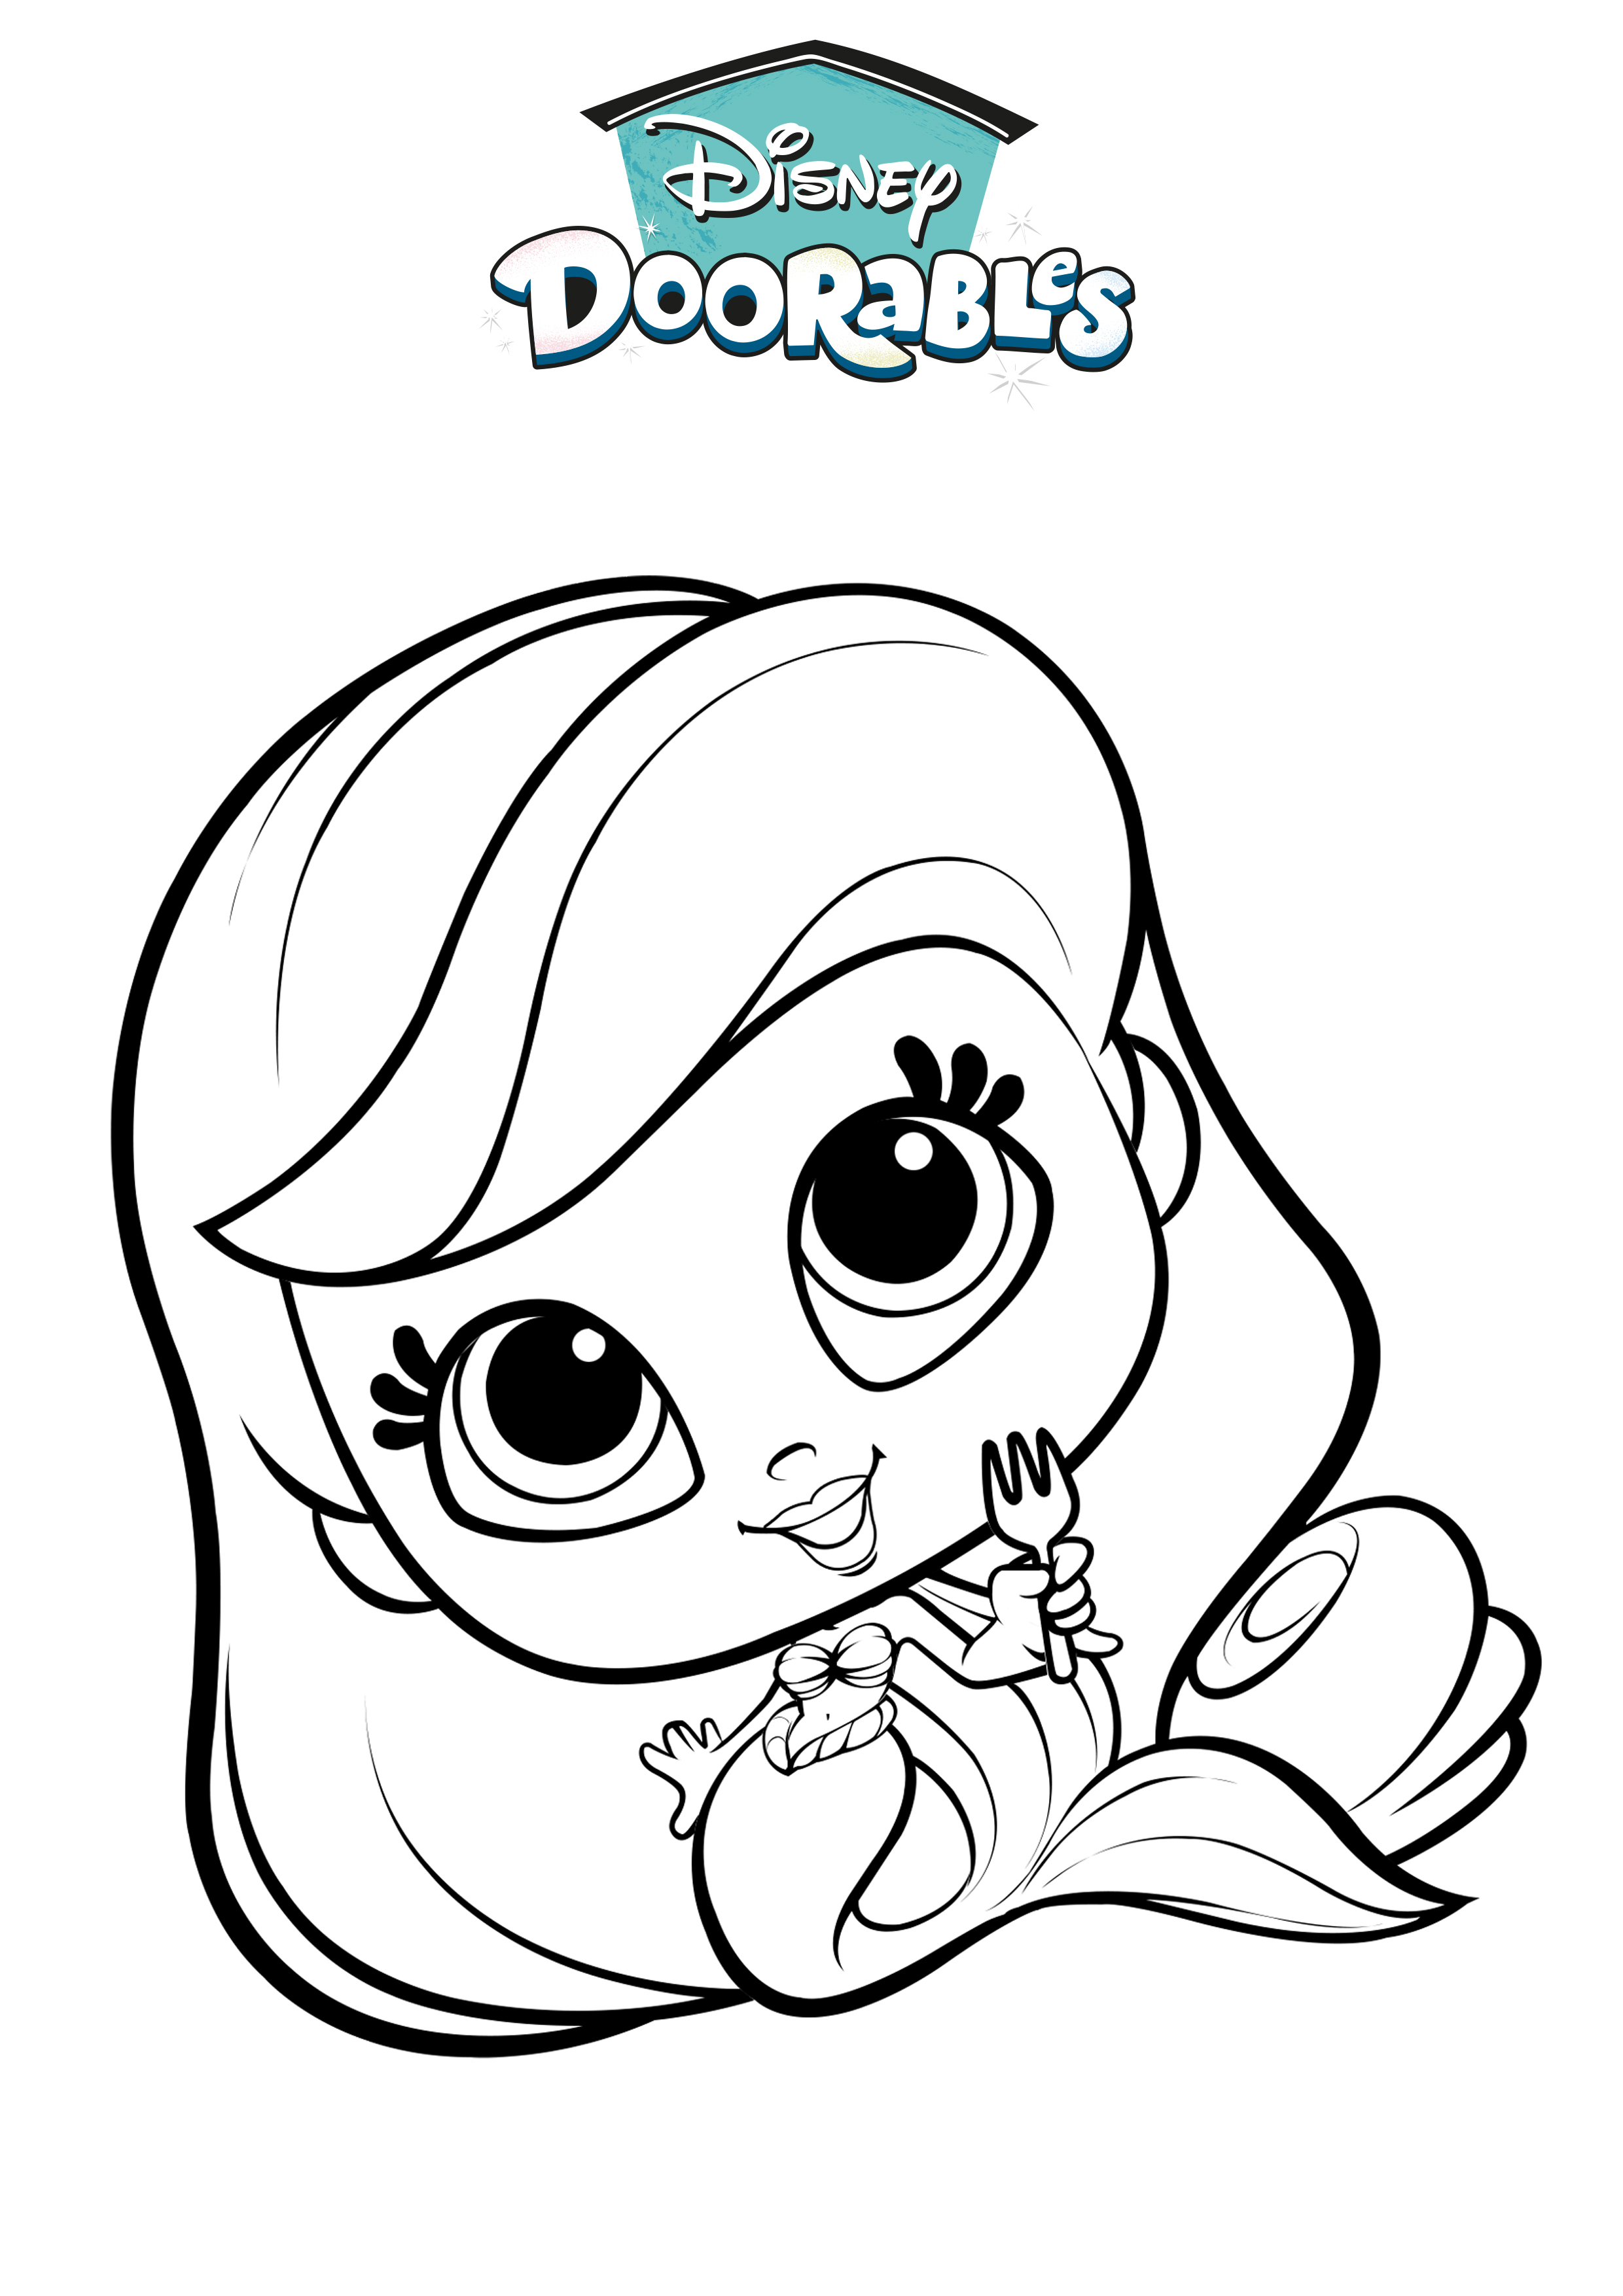 Download your doorables world colouring sheets